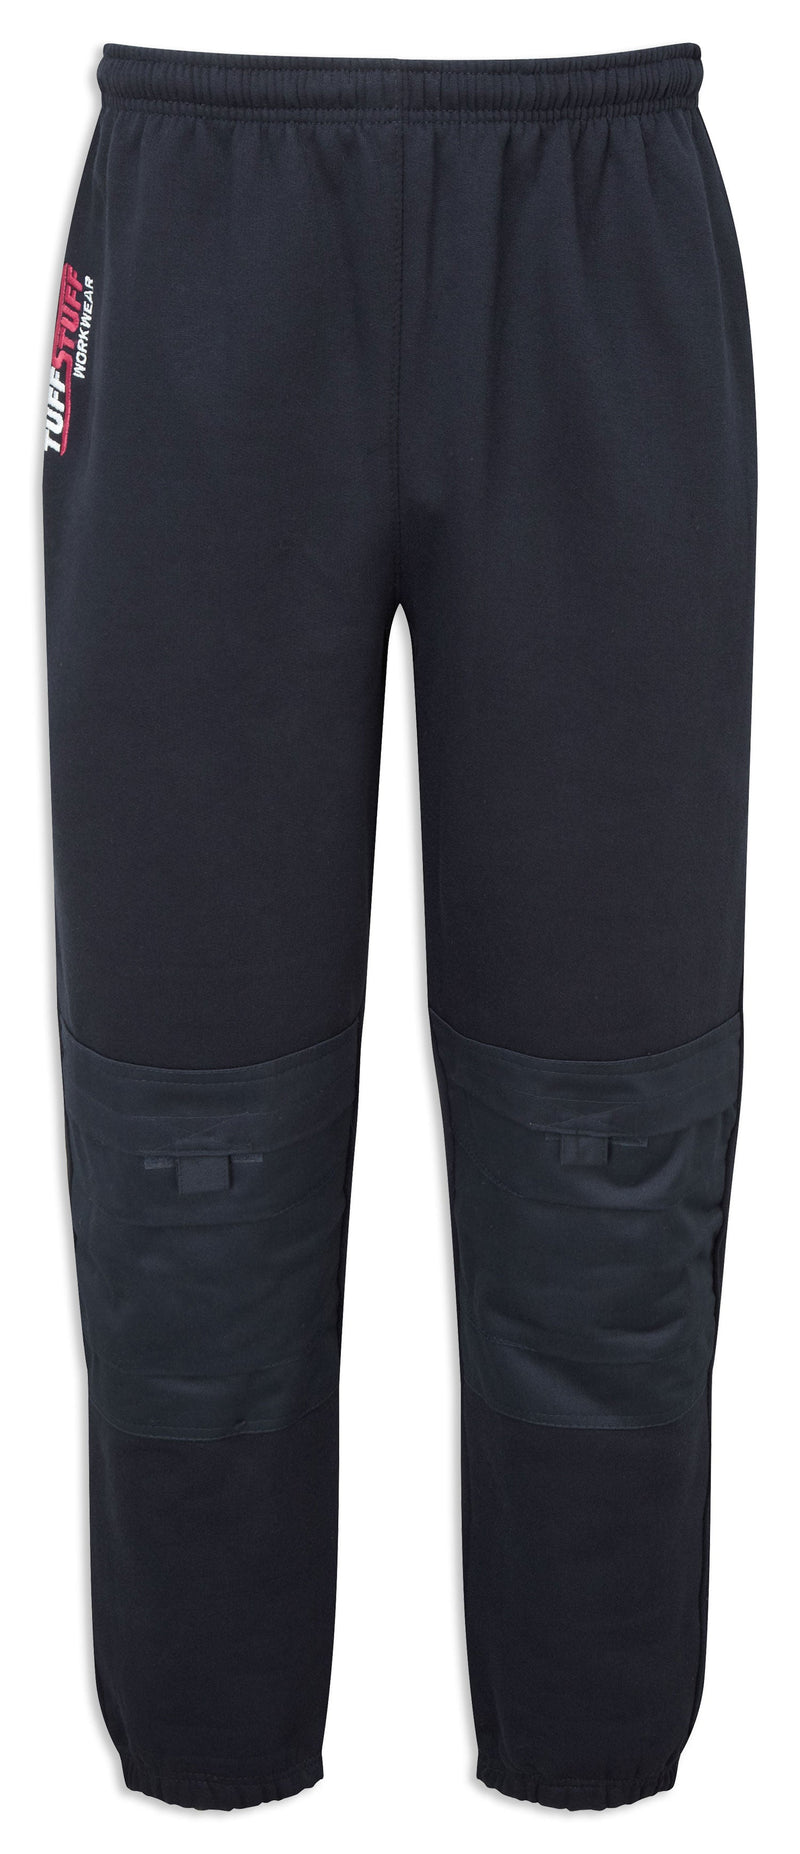 Navy Jogging pants with knee pads for work